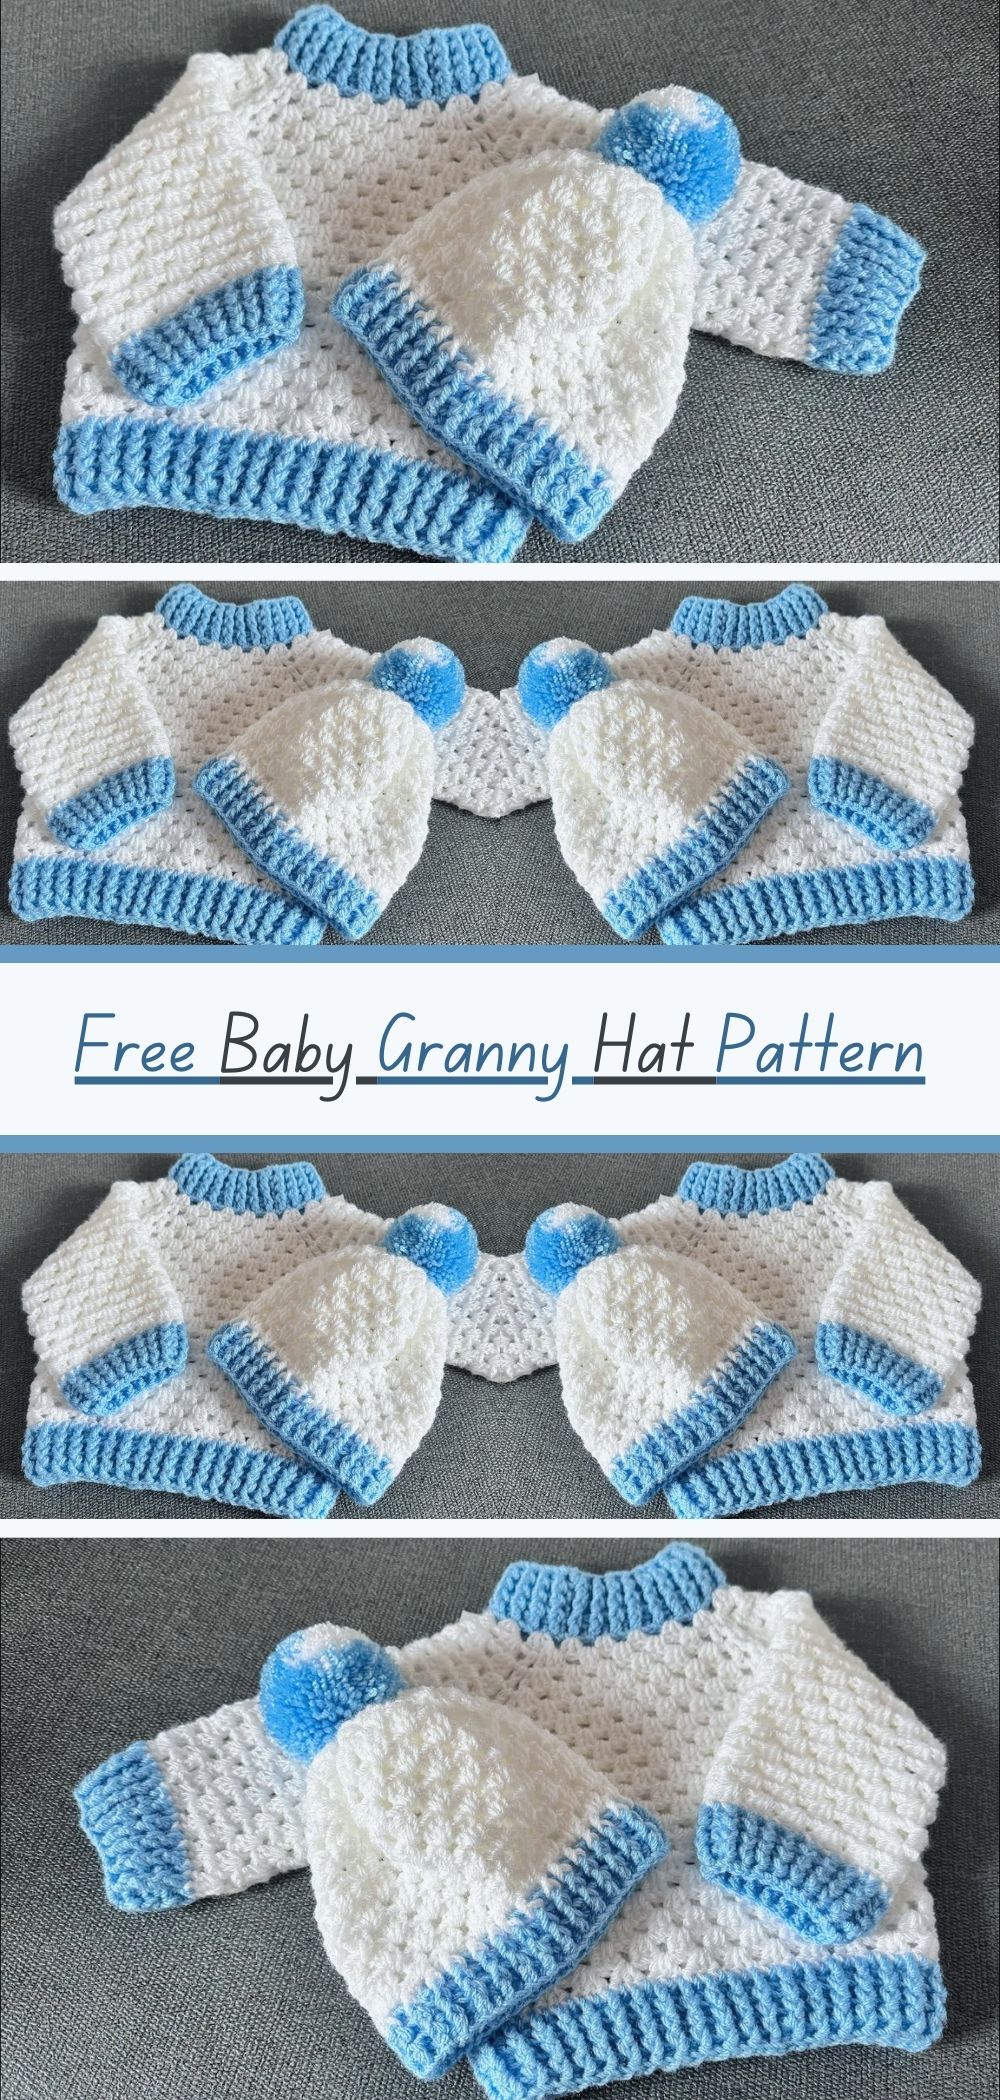 Free Baby Granny Hat Crochet Pattern - Craft a cozy and adorable granny hat for babies with this free crochet pattern